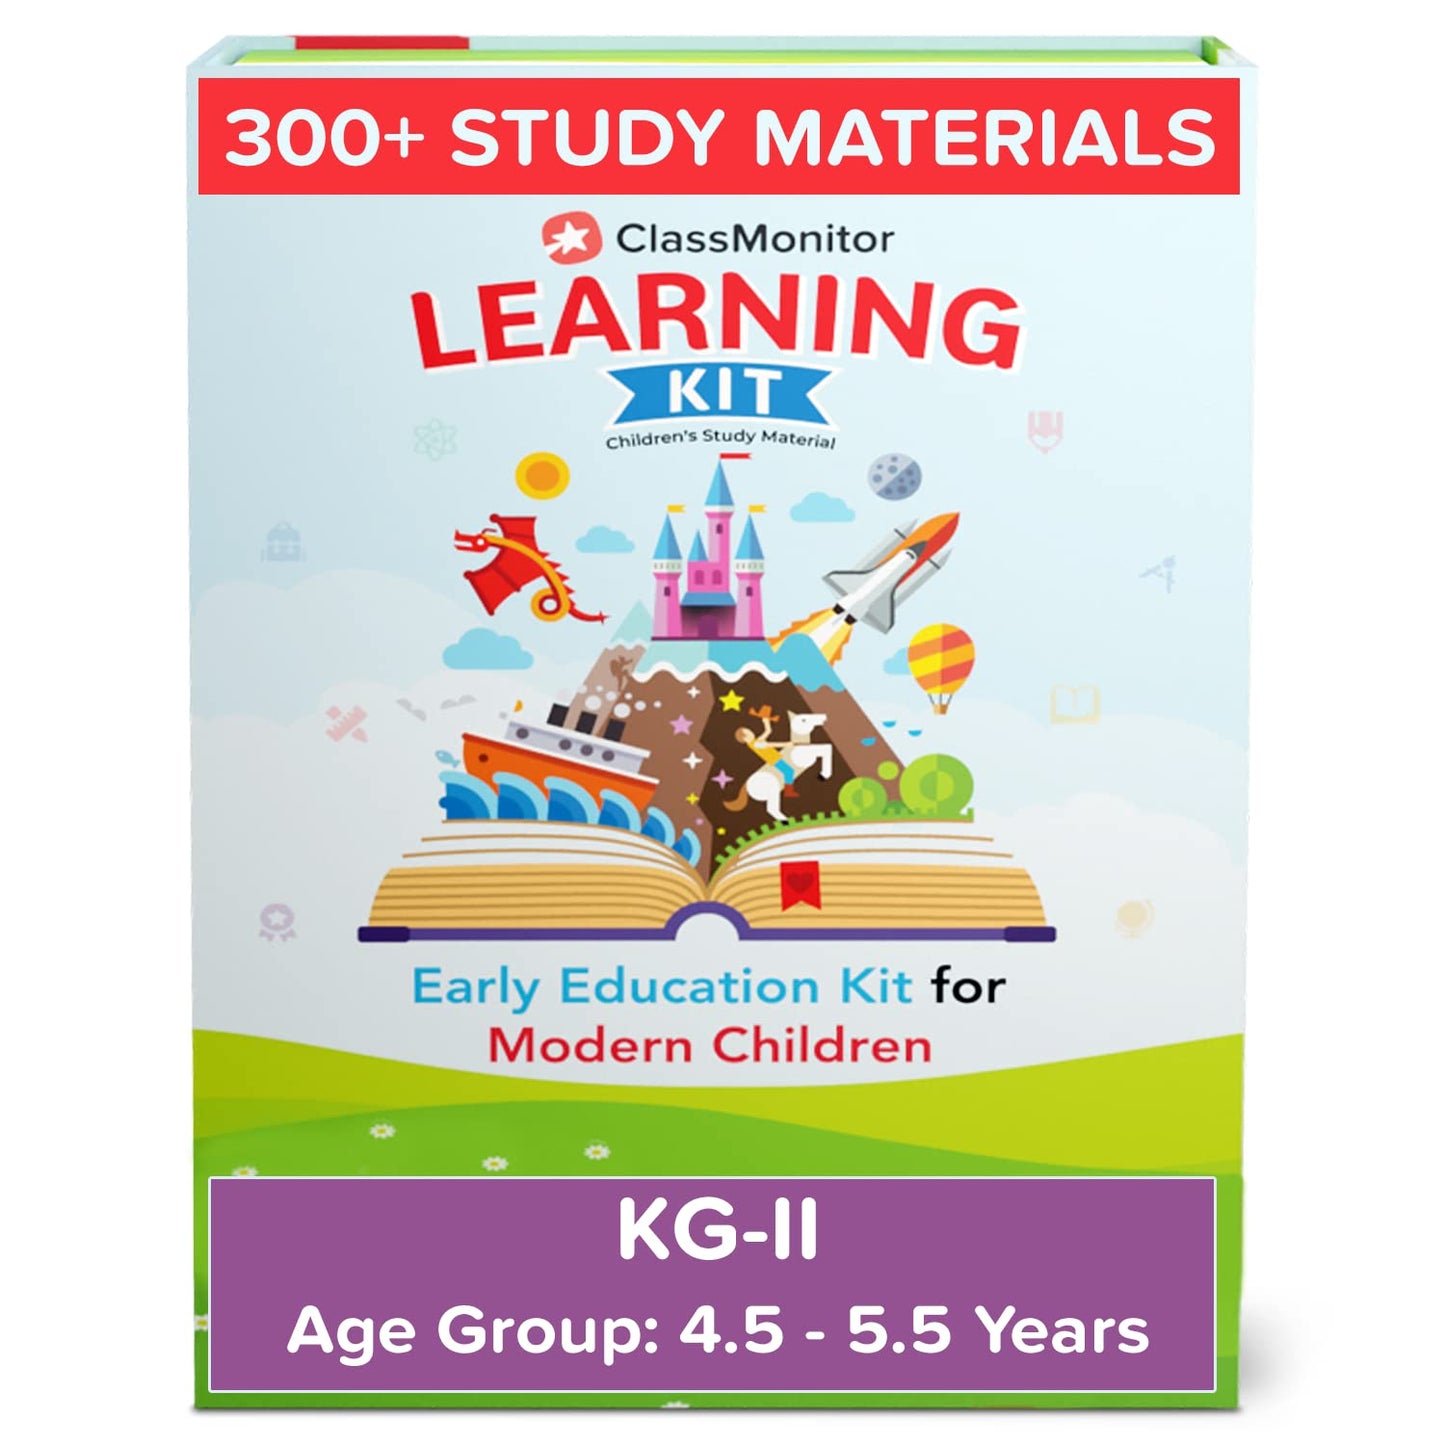 ClassMonitor KG2 Preschool Learning Educational Kit includes 300+ Early Learning Activity Sheets for kids of Age 4.5 - 5.5 Years